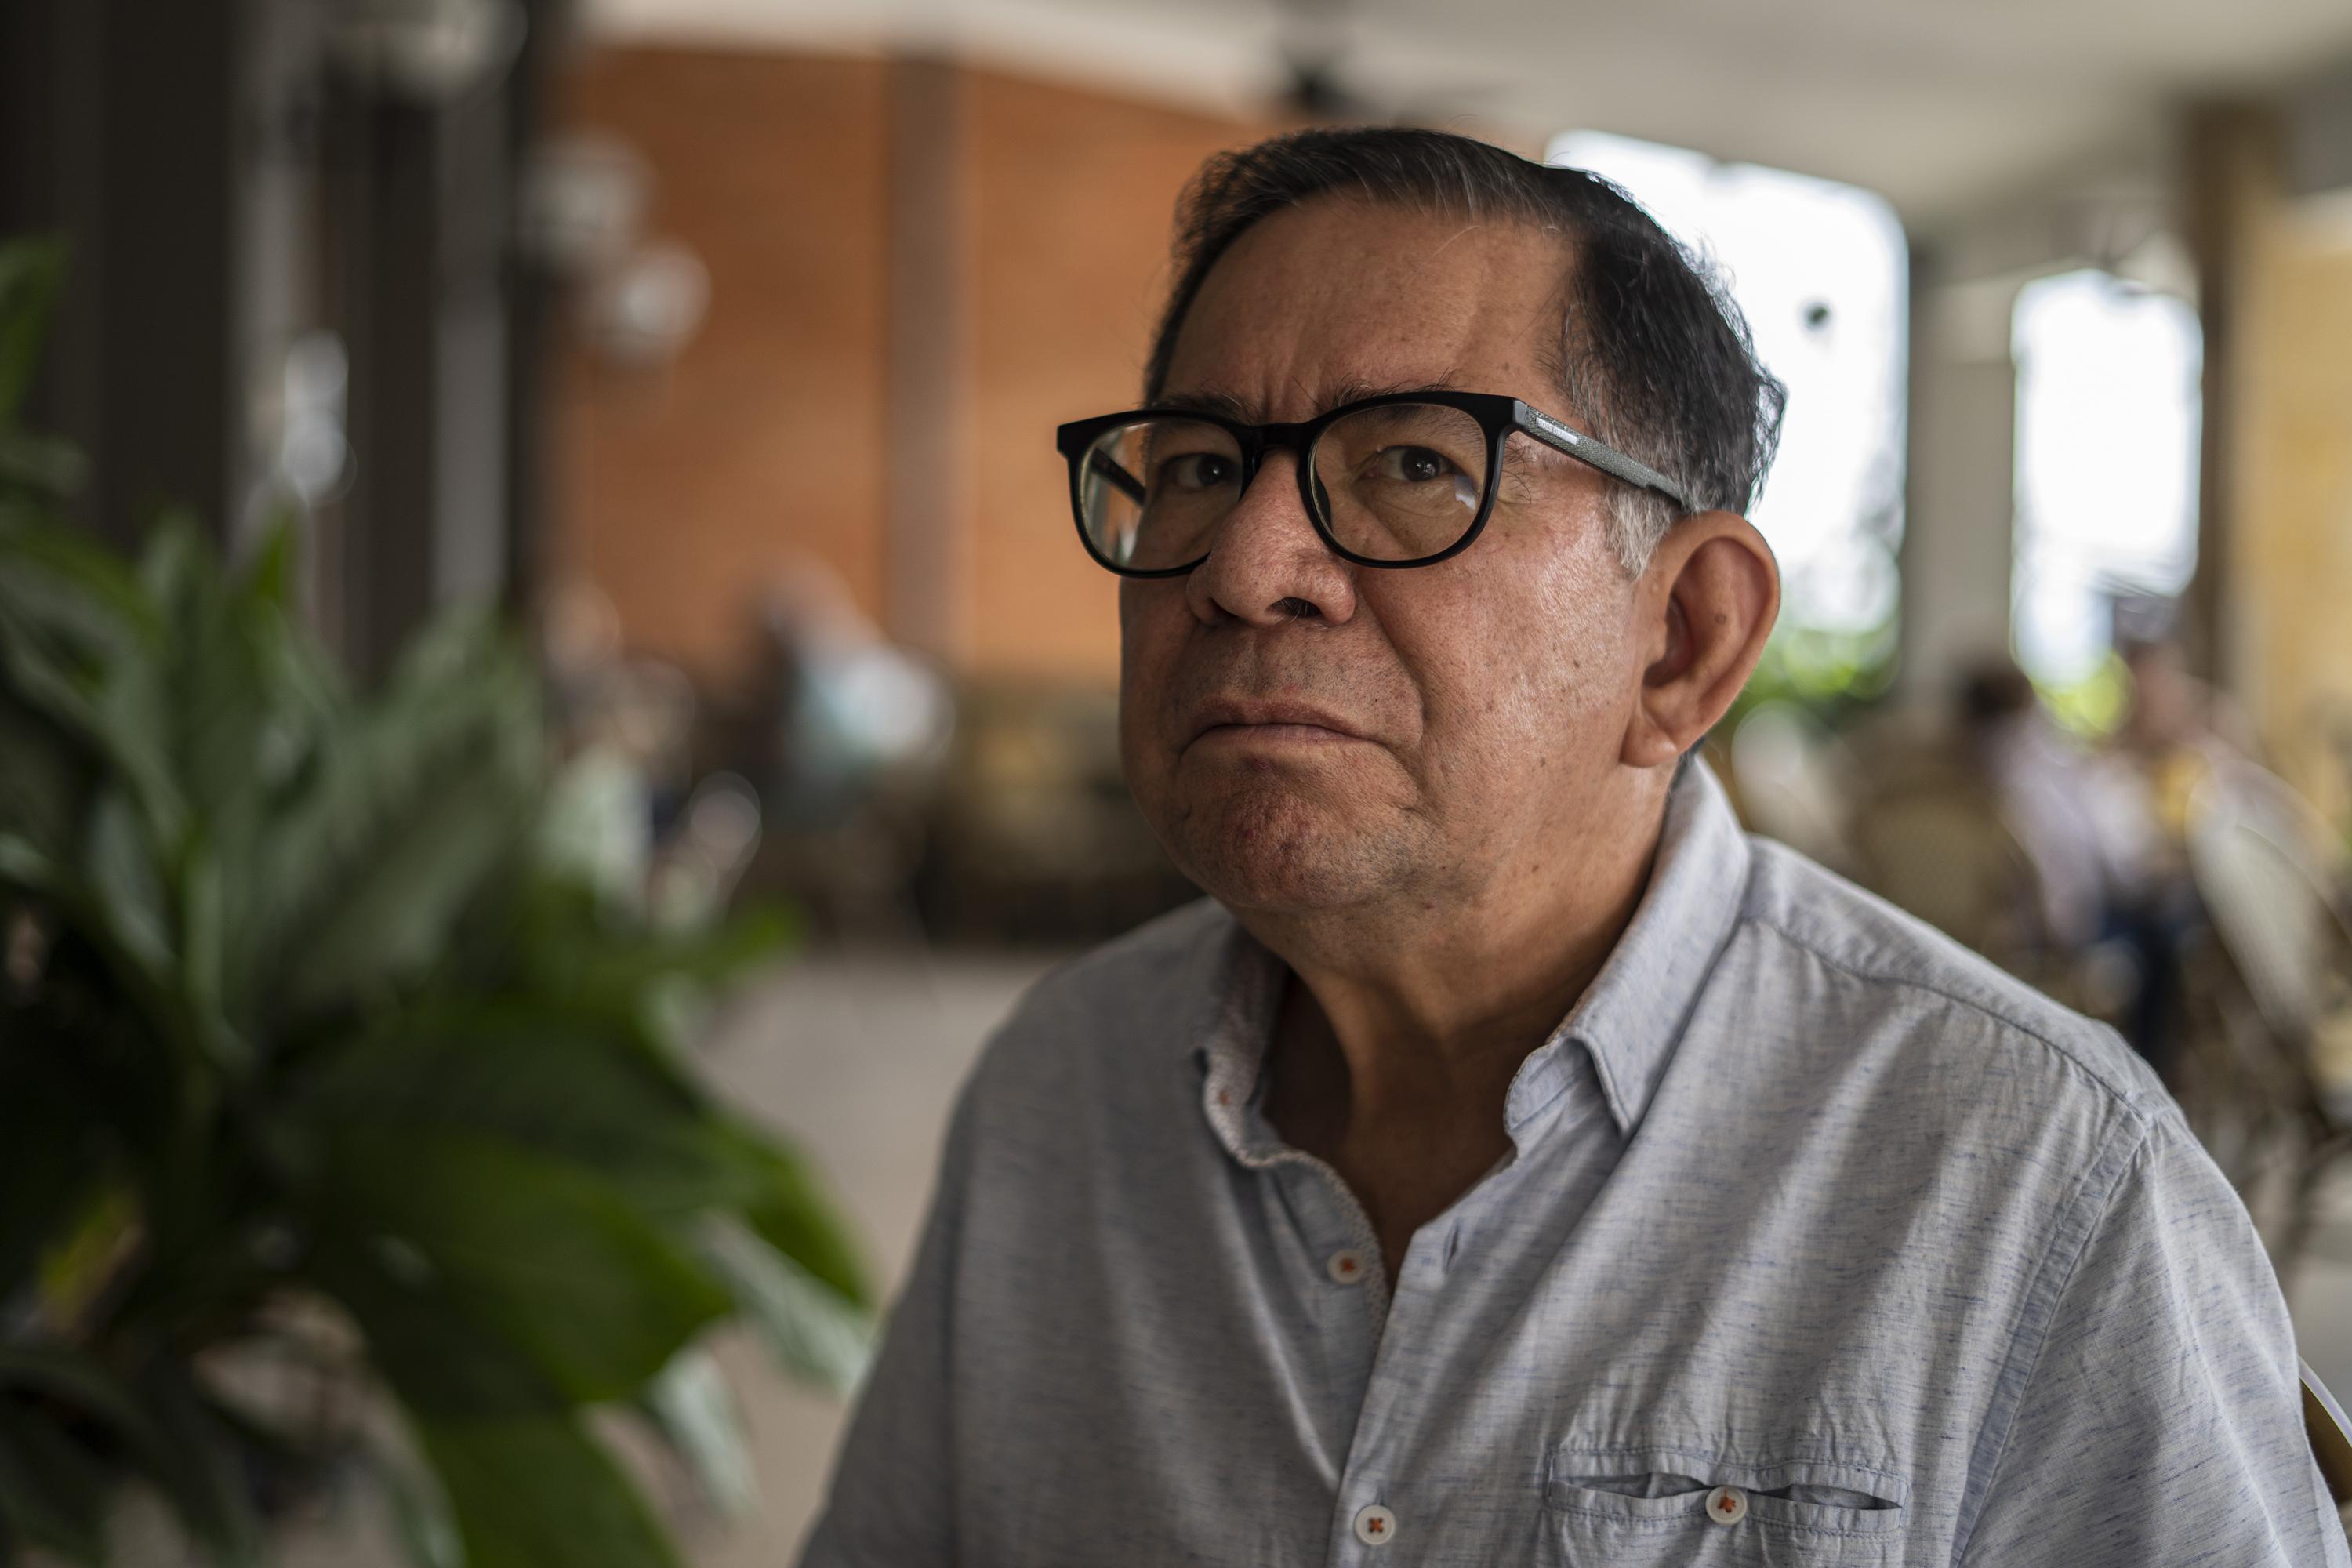 Eugenio Chicas is one of the few leaders of the FMLN who gives interviews and directly criticizes the left-wing party that governed the country from 2009 to 2019. Photo: Víctor Peña/El Faro